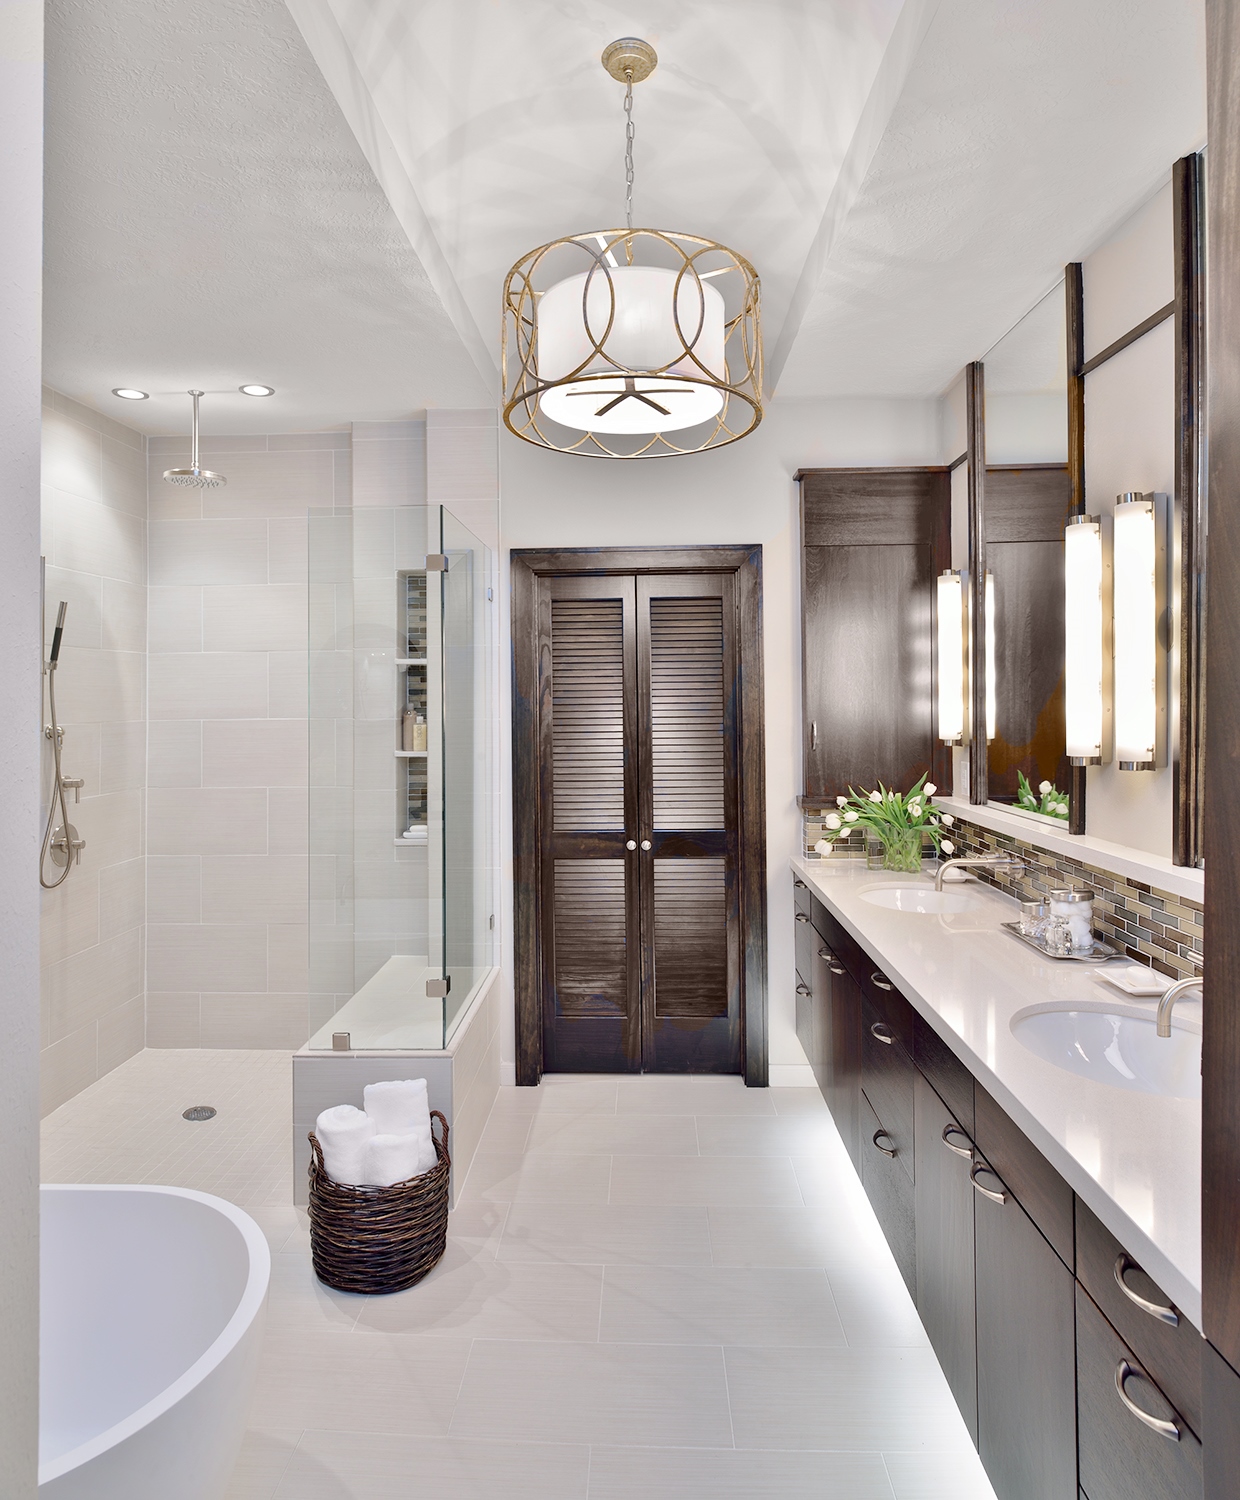 Planning A Bathroom Remodel? Consider The Layout First ...